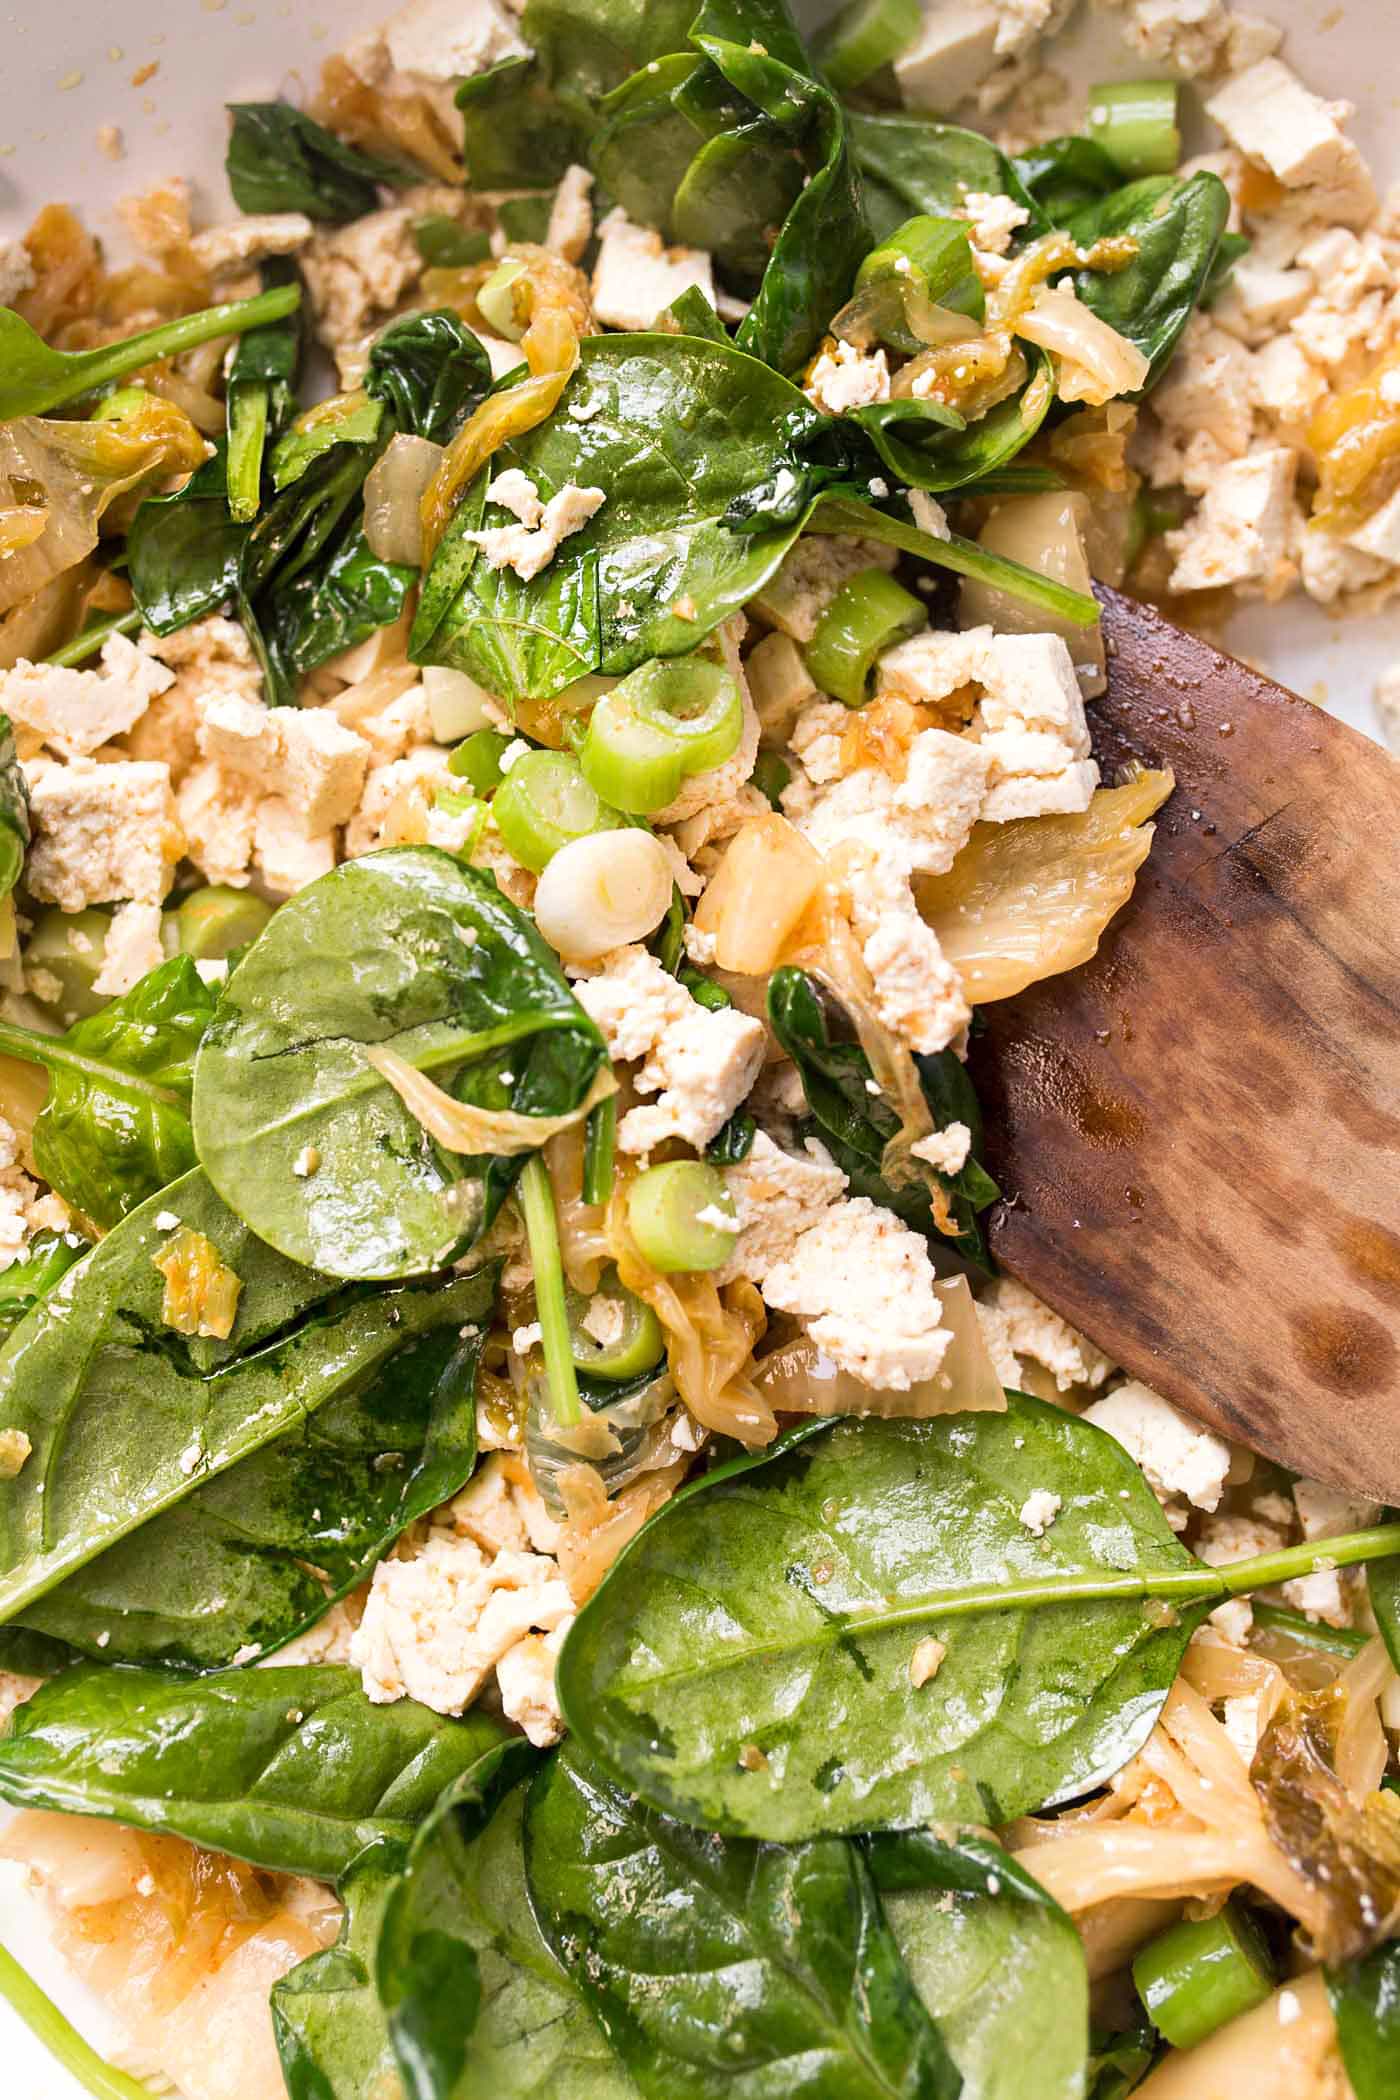 5-Ingredient Tofu Scramble in the making! With kimchi, spinach and green onions for crunch!